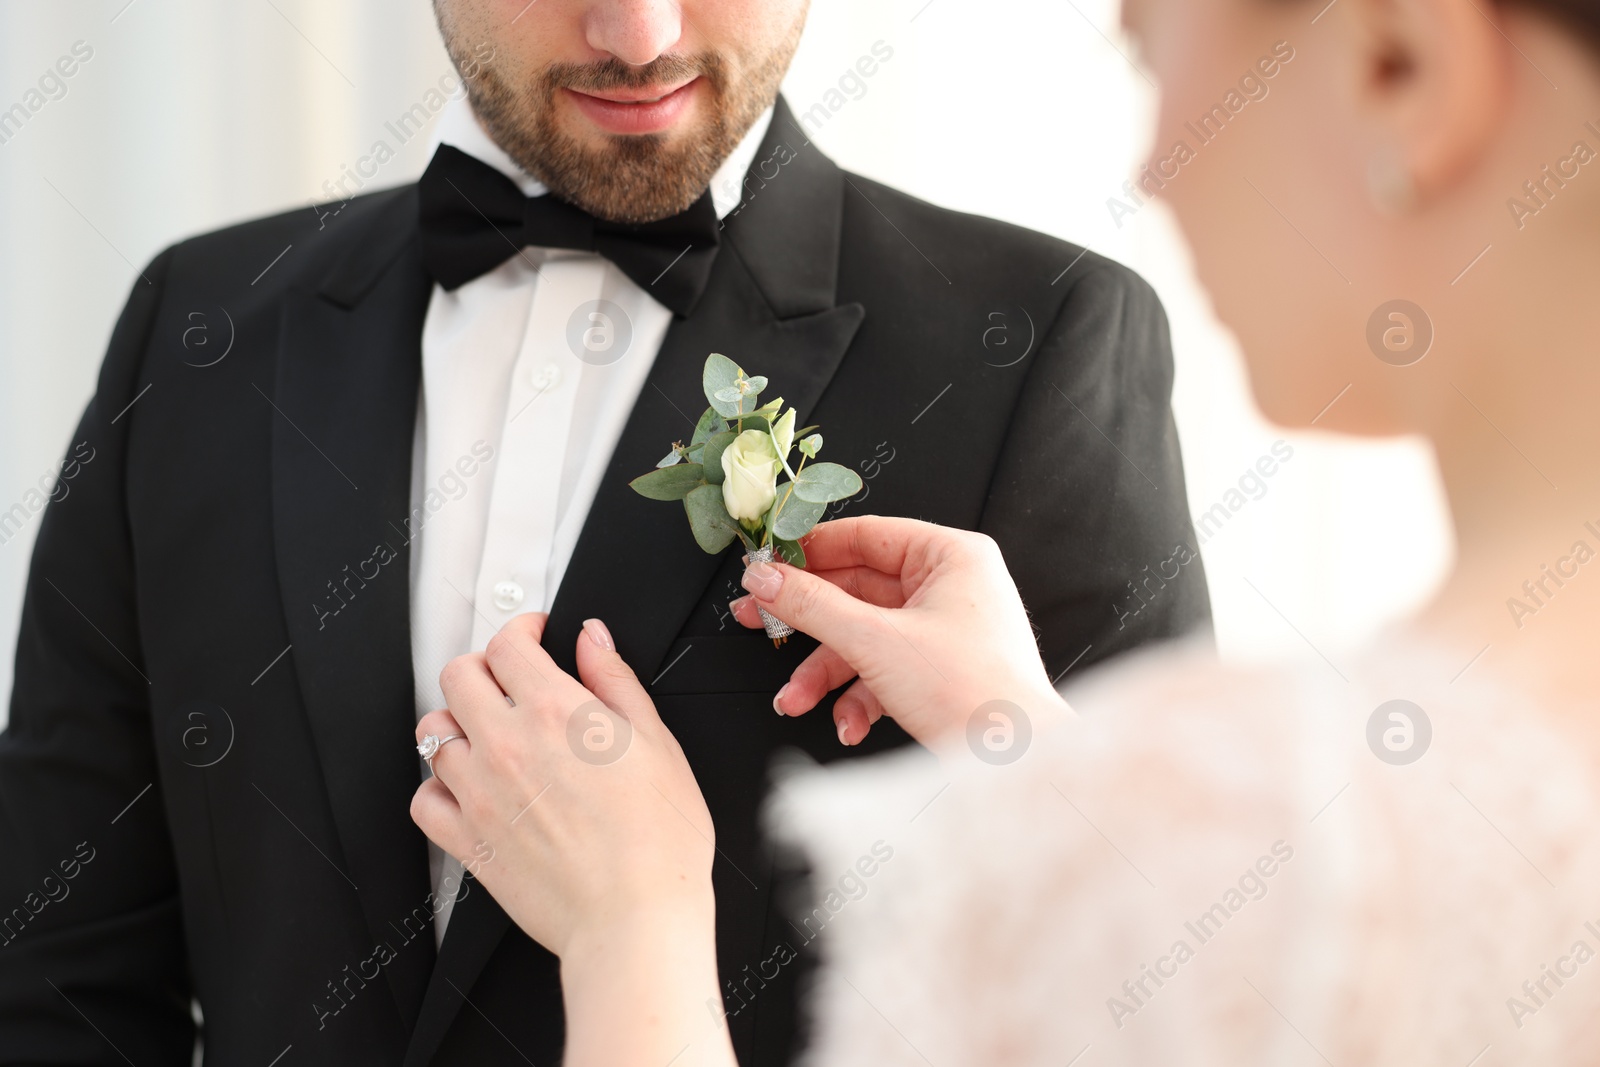 Photo of Bride putting boutonniere on her groom's jacket against light background, closeup. Wedding accessory